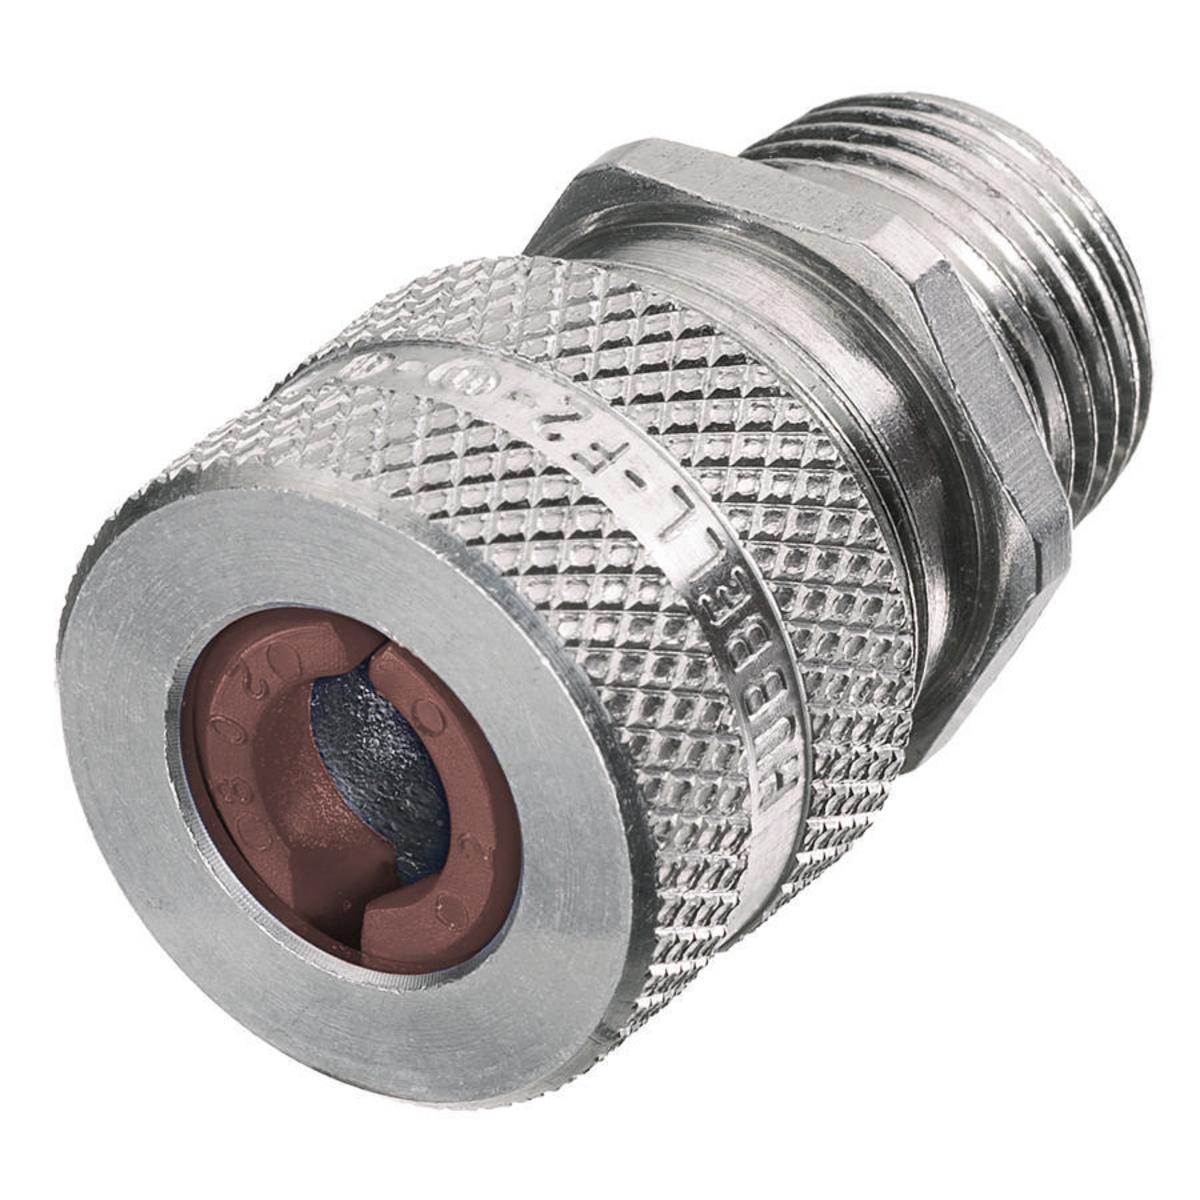 Hubbell SHC1040 Kellems Wire Management, Cord Connectors, Straight Male, .50-.63", 1", Aluminum  ; Aluminum cord connector provides durable performance ; Standard Product, Standard Product